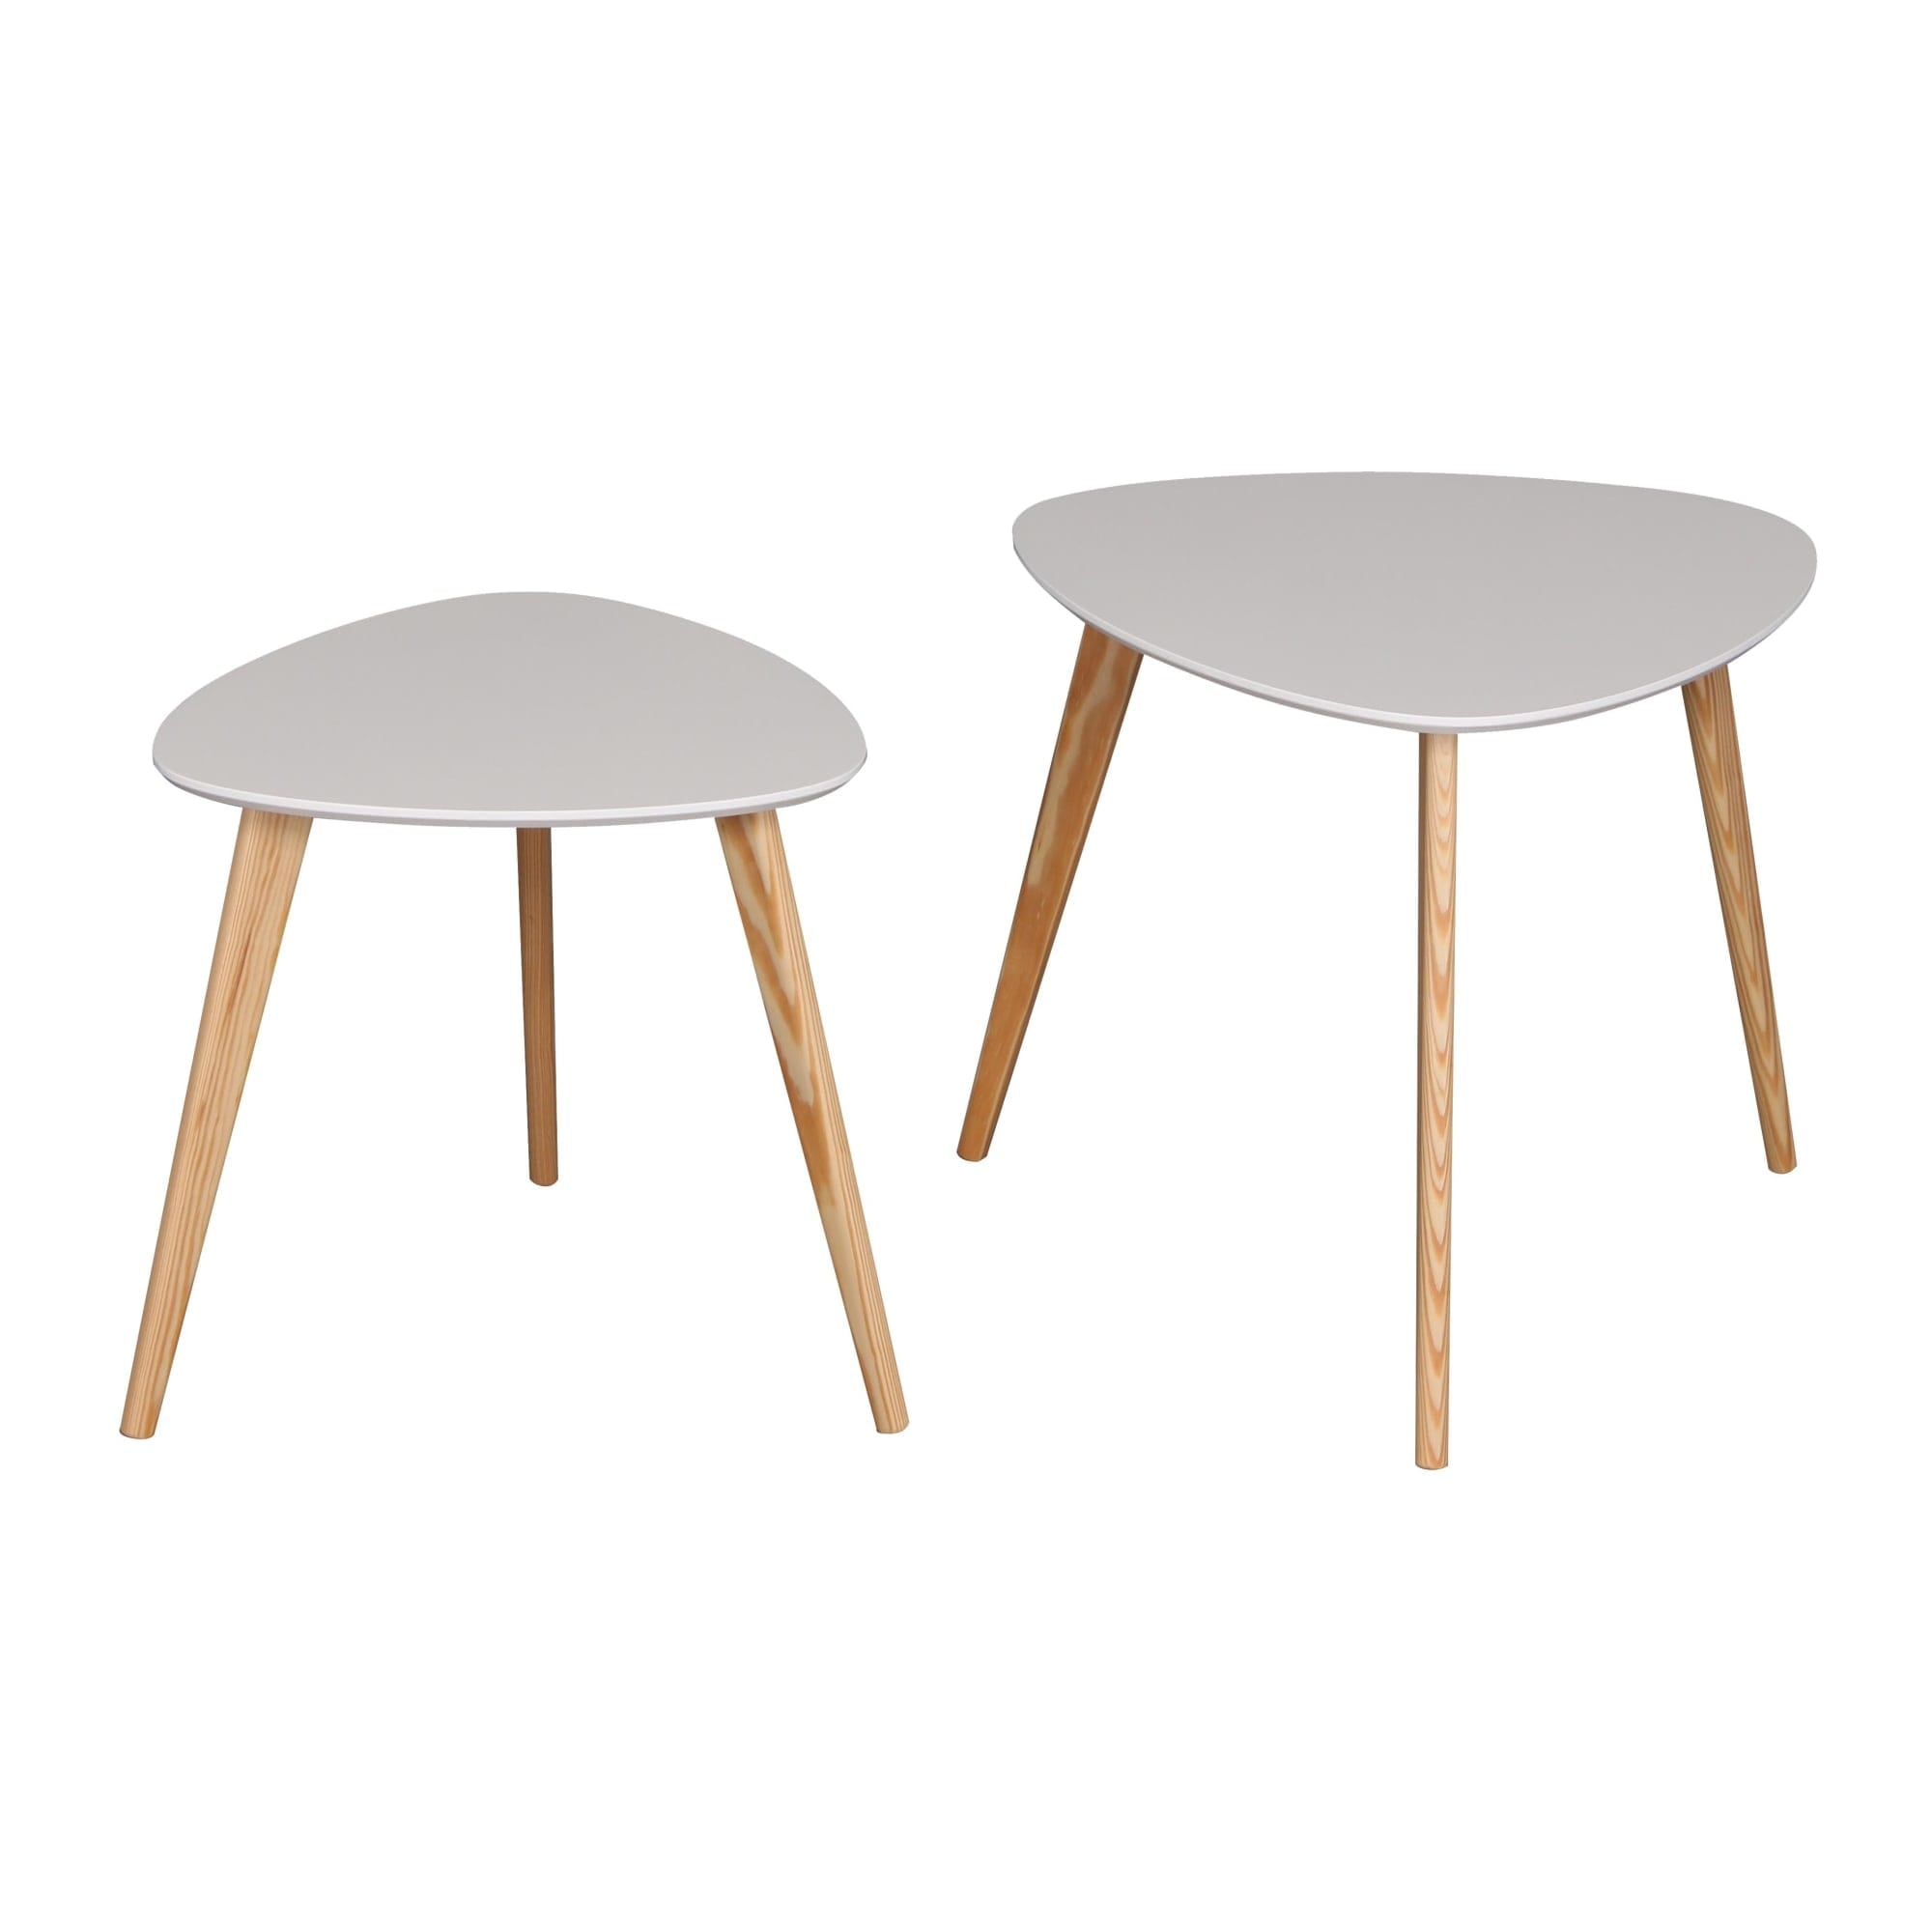 Home Basics 2 Piece Side Table Set $30.00 EACH, CASE PACK OF 1